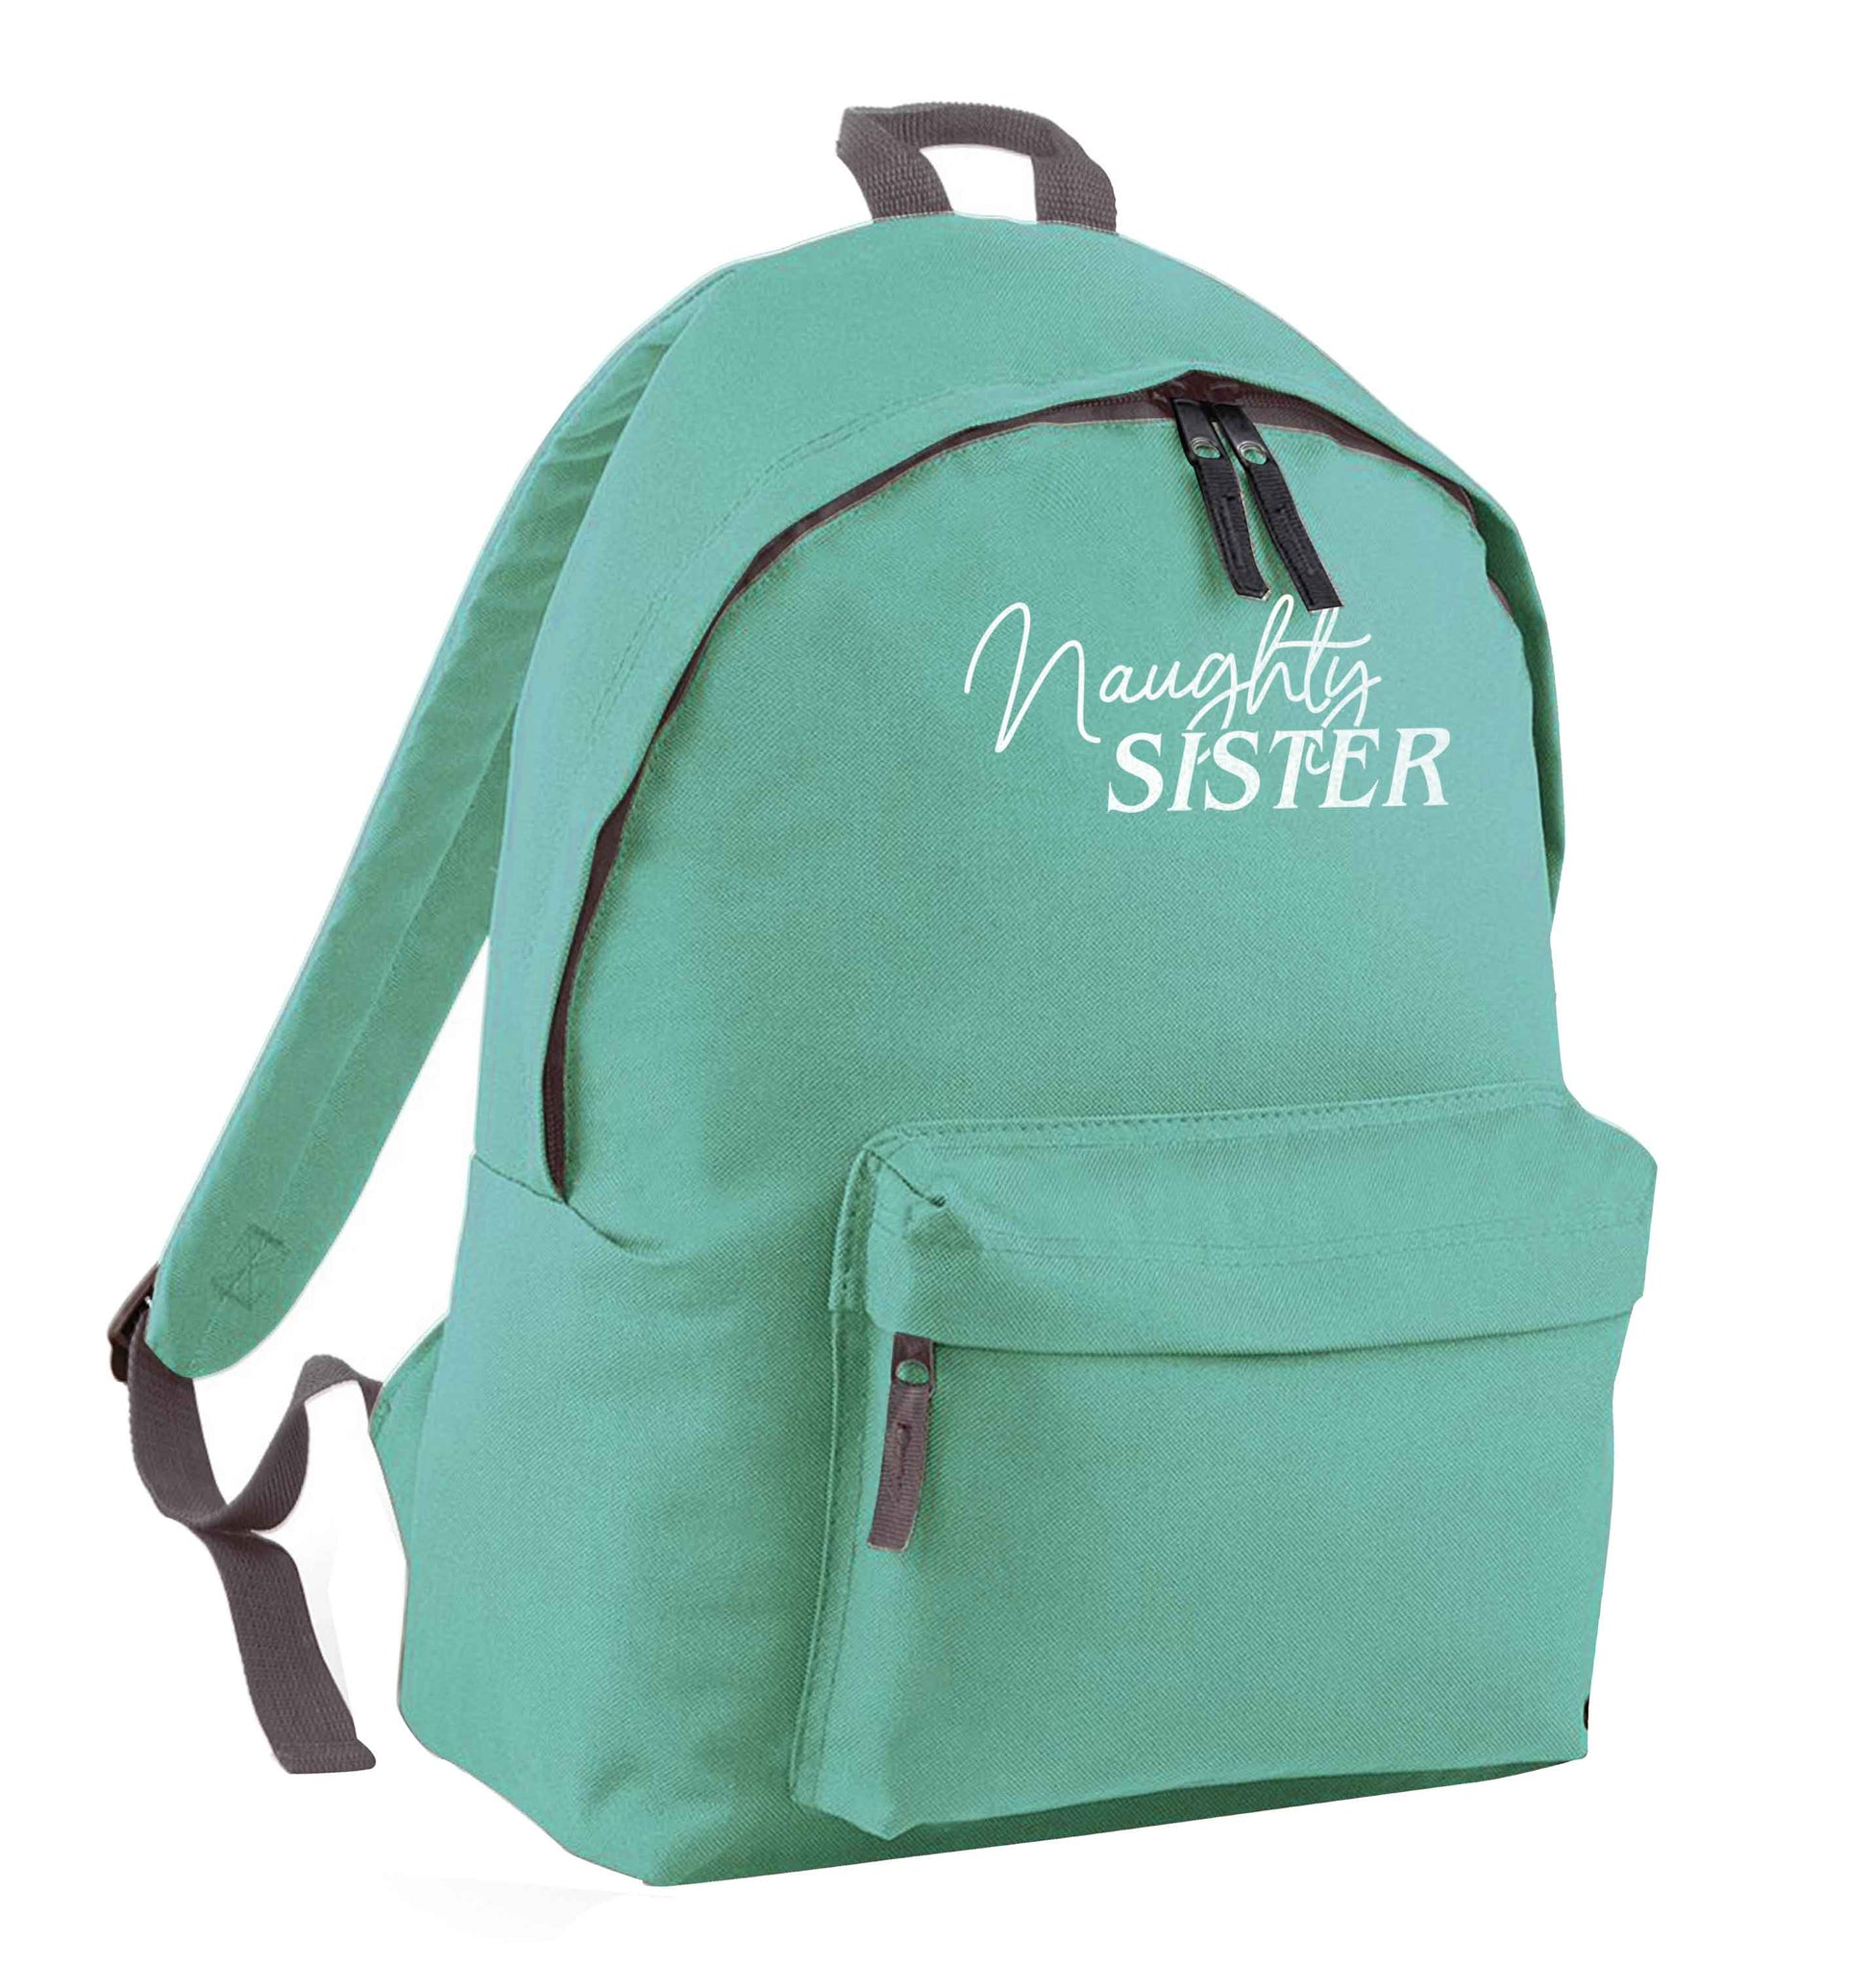 Naughty Sister mint adults backpack